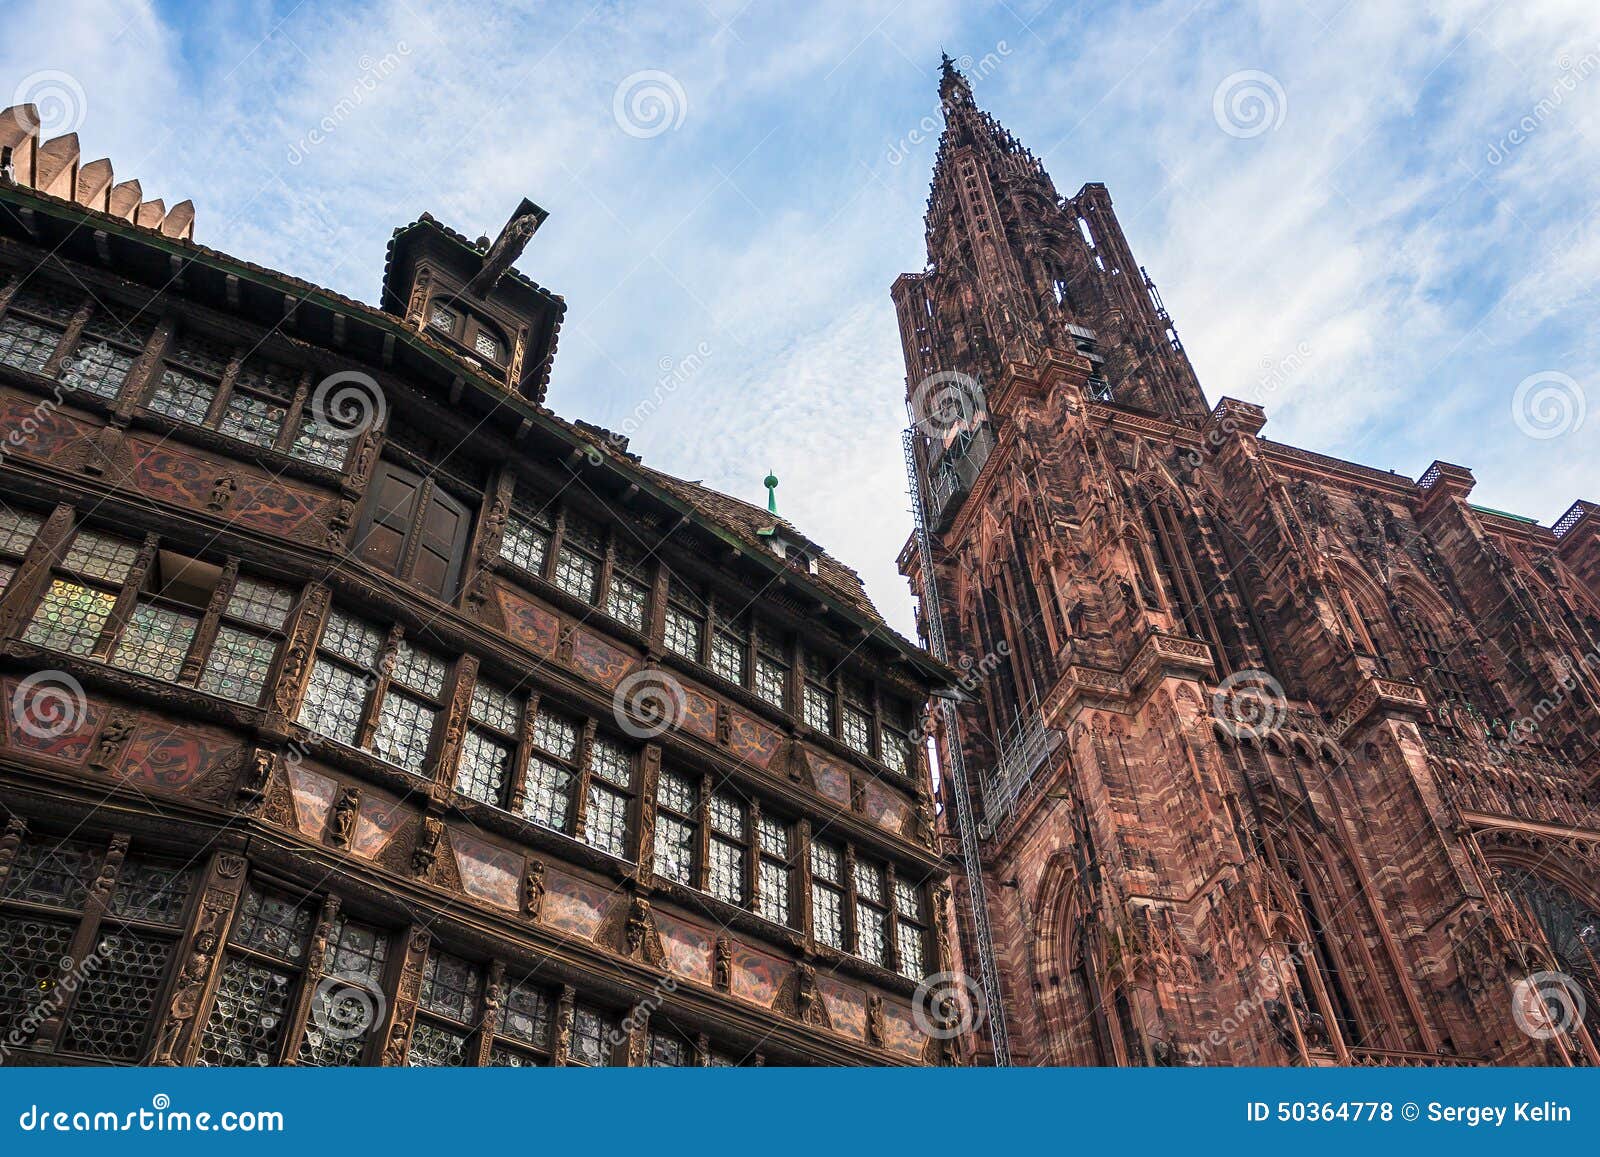 maison kammerzell and cathedrale notre dame de strasbourg